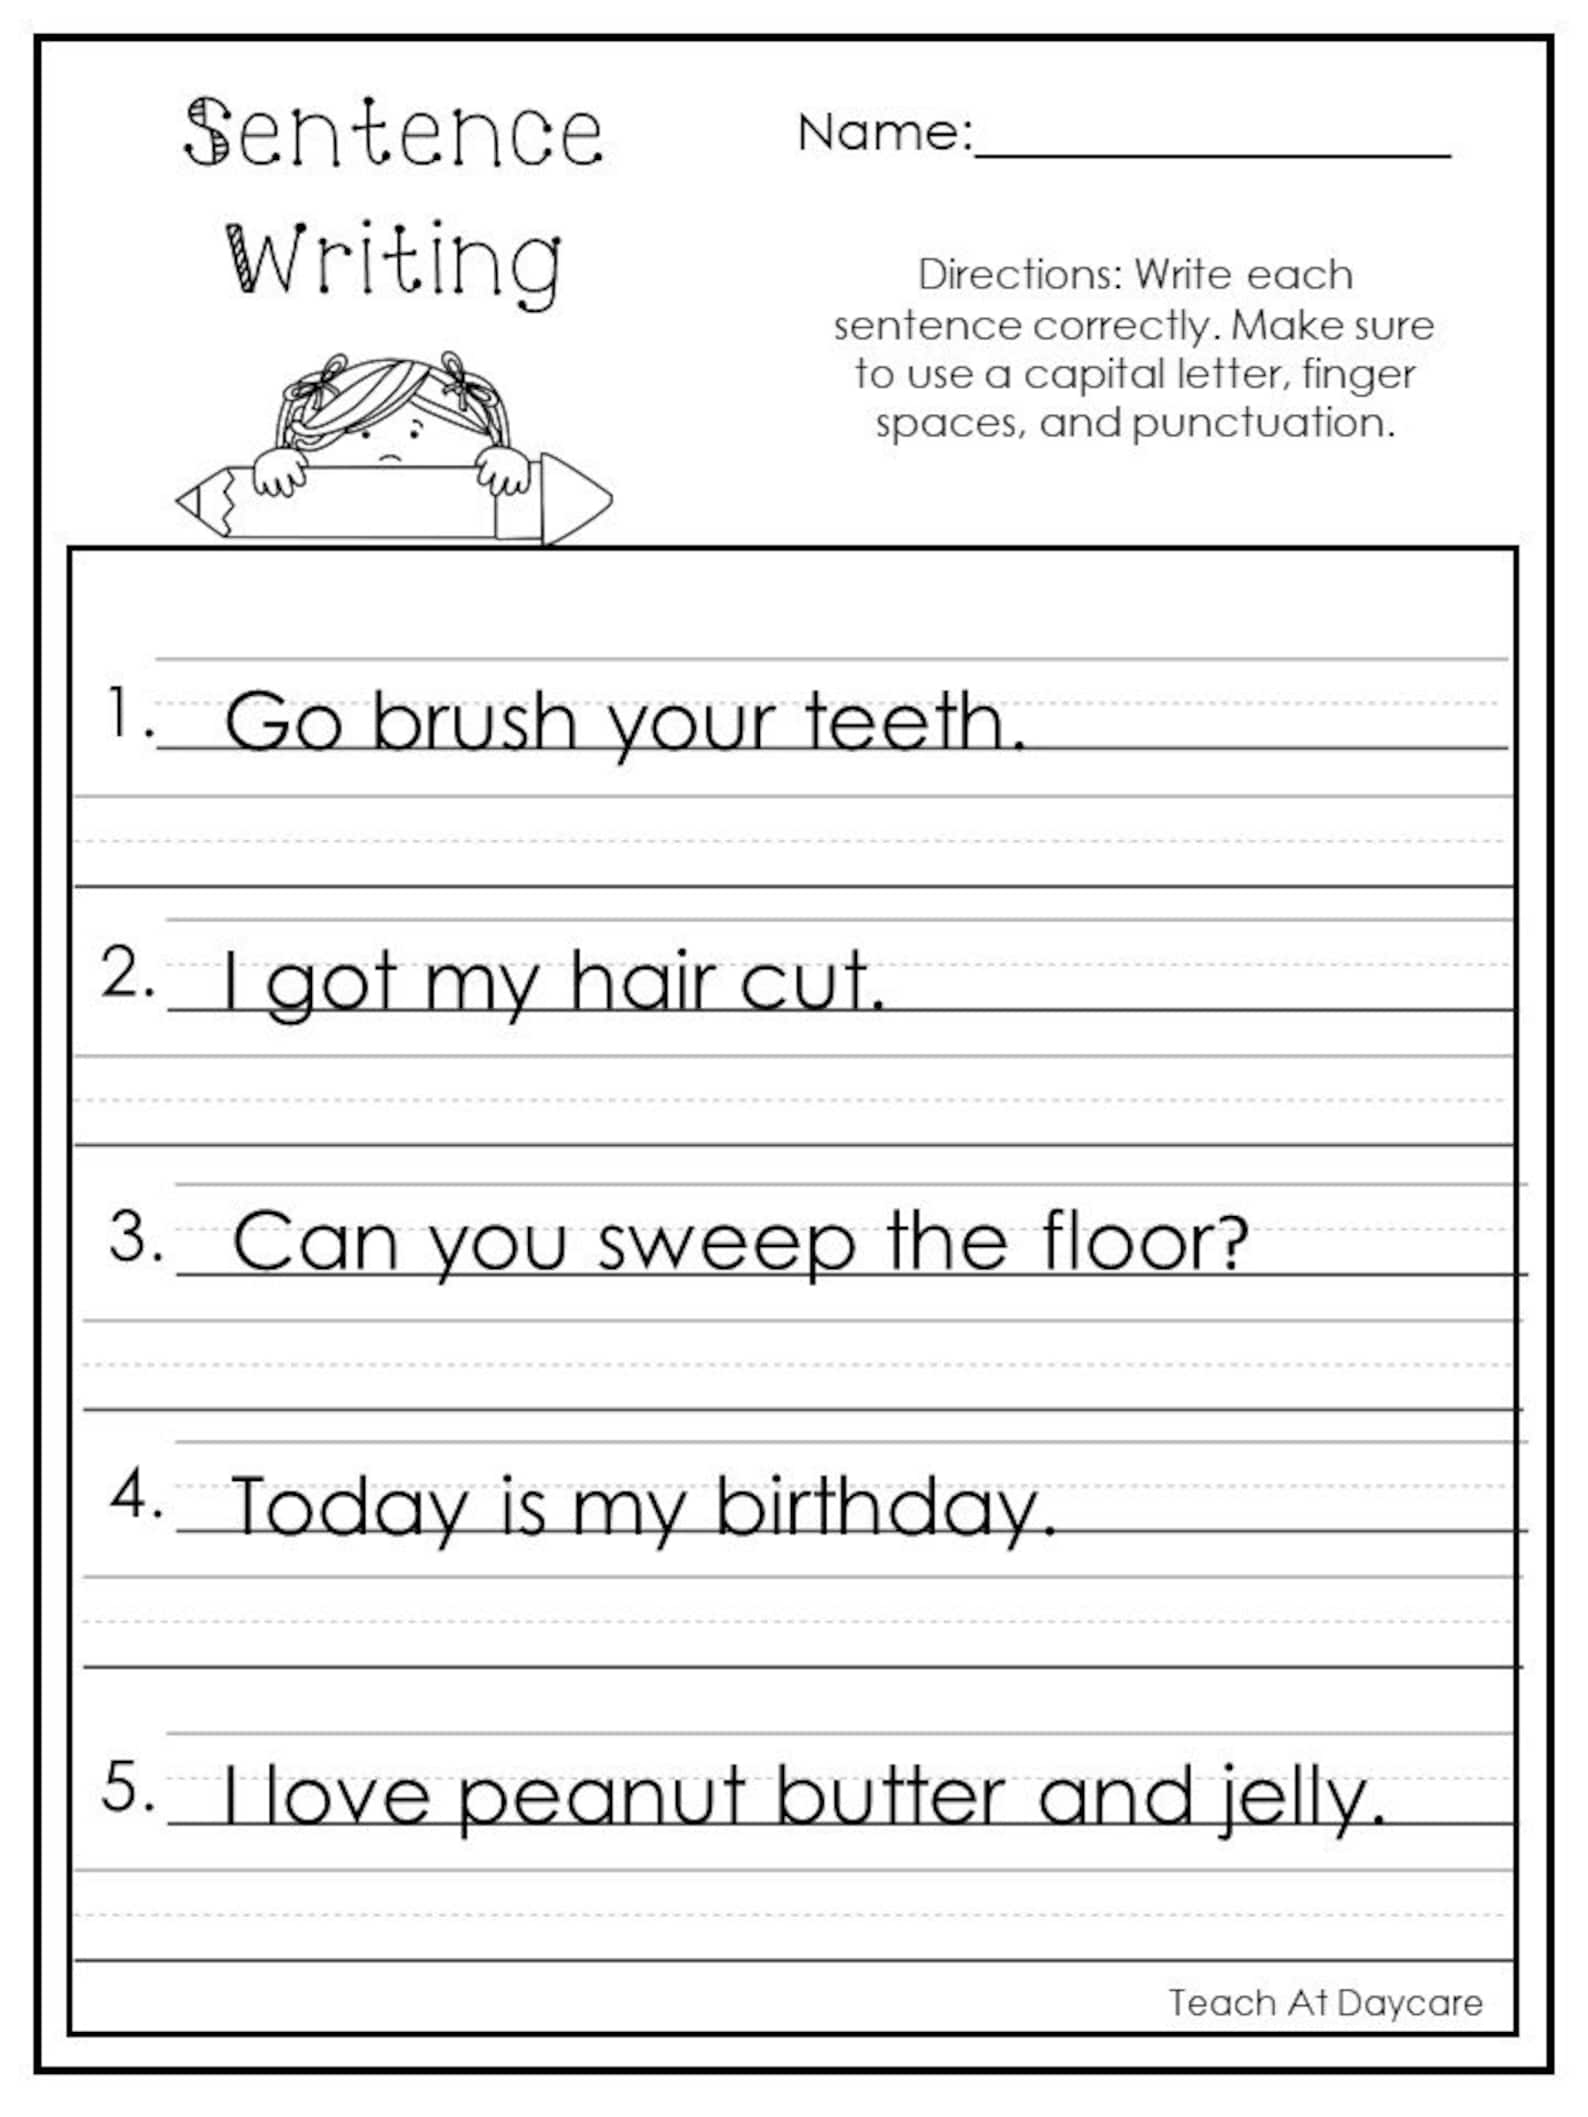 How To Write A Complete Sentence Worksheet Free